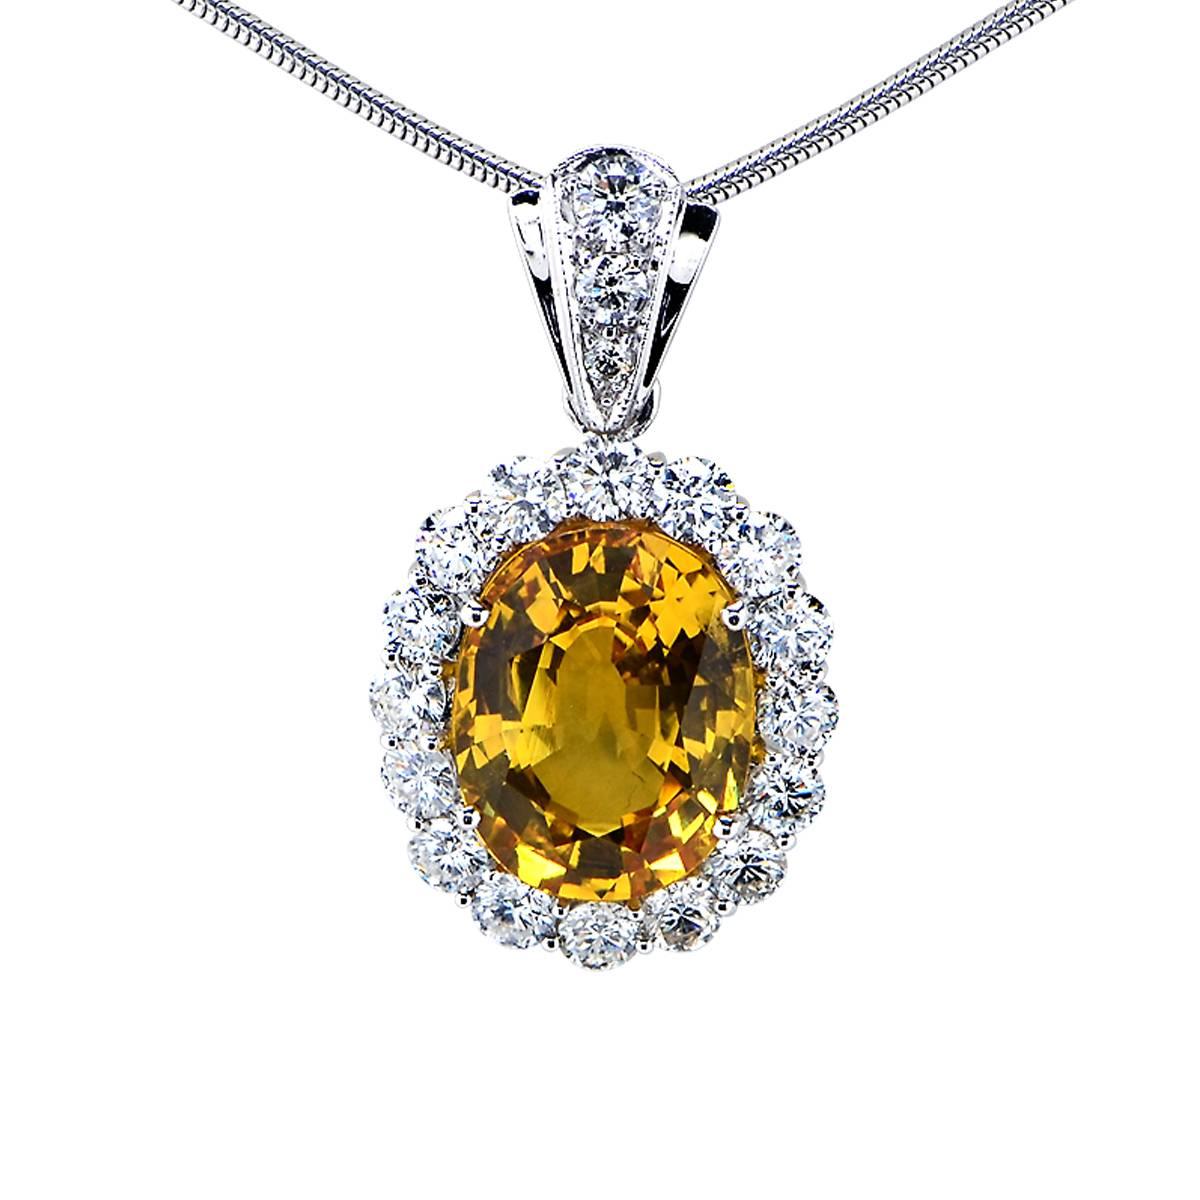 18 Karat White Gold Necklace Featuring a 9ct Oval Cut Vibrant Yellow Sapphire Accented by 17 Round Brilliant Cut Diamonds Weighing 2.50cts Total, G Color, VS Clarity.